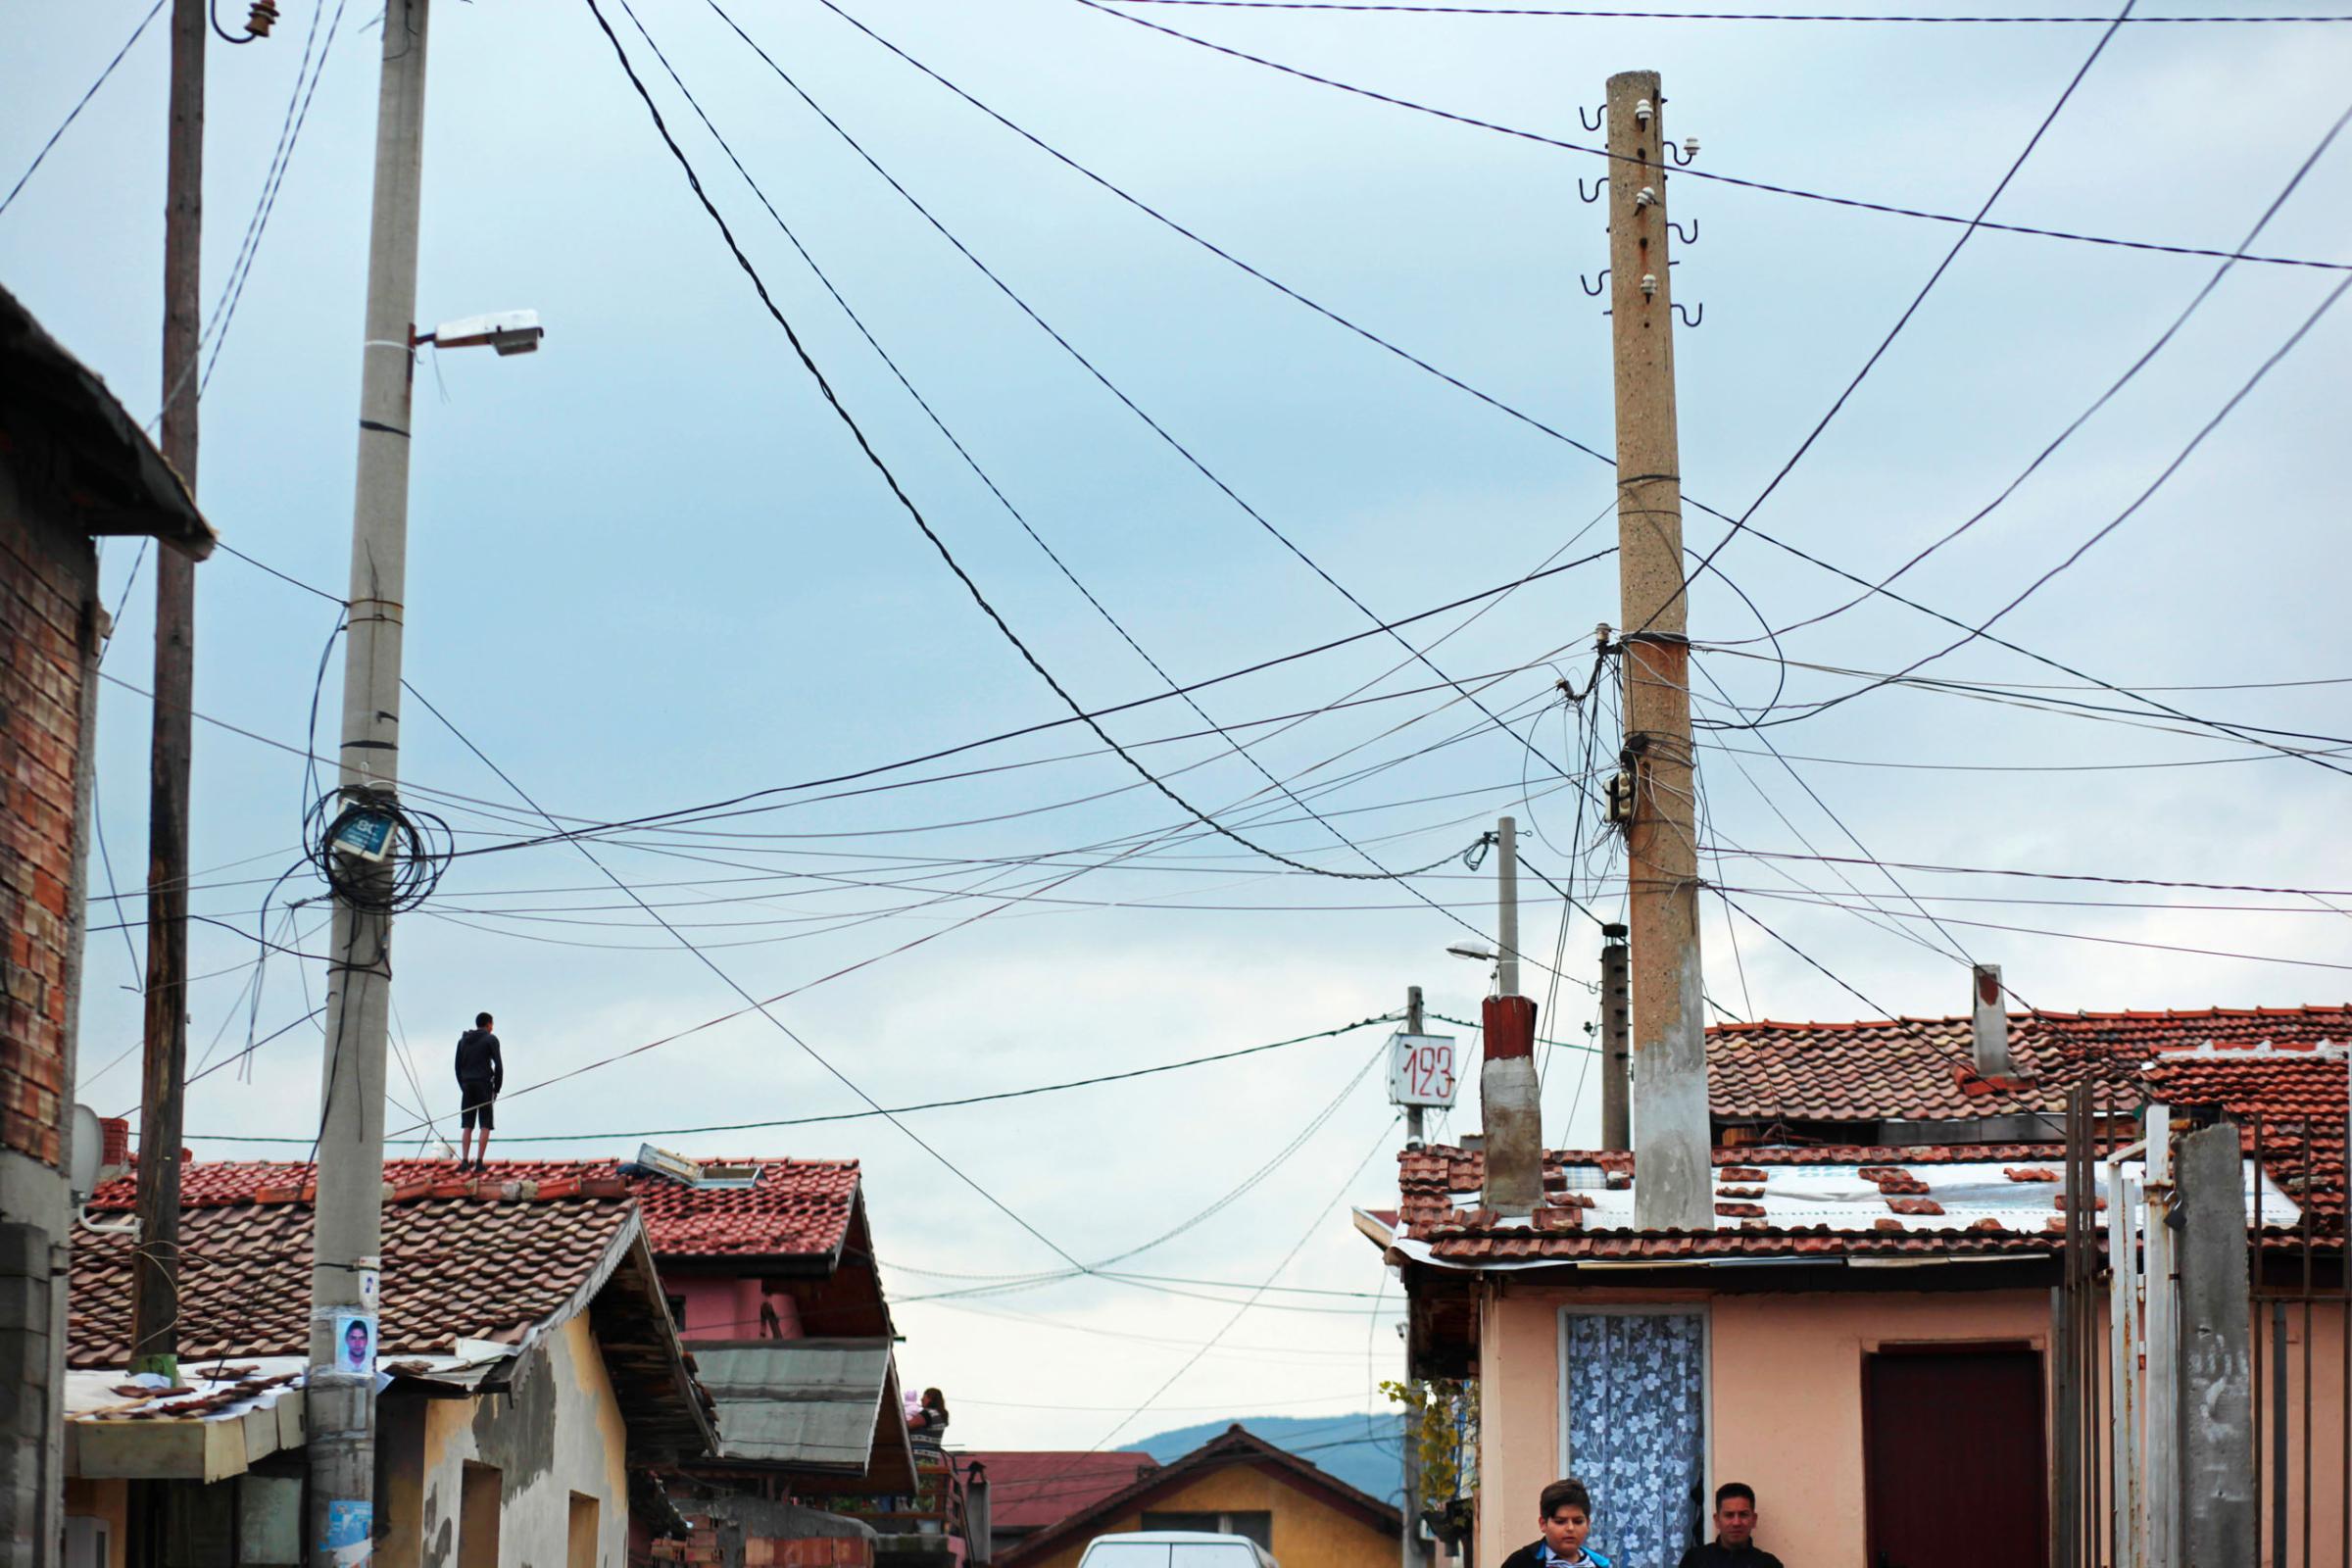 A man stands on a rooftop below a handmade electrical grid hanging over a Roma village, as people turn up to vote in October's Parliamentary elections in the nation's capital, Sofia. Today, October 5th, 2014, is also Midterm Elections day in the States - its multi-party ticket an unimaginable reality in autocratic Bulgaria pre-1989. Despite a month-long vacillation on the make-up of their political coalitions and their new prime minister - and that only 49% of the population turned up to vote today - party leaders narrowly avoided reelections, with former prime minister and leader of center-right party GERB Boyko Borisov reinstated at the post.This photo is from a project that aims to gauge the state and effect of democracy in the former Soviet satellite nation Bulgaria, two and a half decades after the fall of the Berlin Wall. The story of democracy in Bulgaria at age 25 is a cautionary tale about transplanting one-size-fits-all Western values to a nation still undergoing social and economic upheaval. Bulgaria is still one of the poorest, most corrupt nations in the European Union, its post-1989 hopes wilted by political instability, high crime rates and skyrocketing inflation. While Bulgarians can now freely vote and protest without much threat to their freedom, their new oppressor is corruption - which is at a 15 year high, across political and civil sectors alike. The ennui is so casually etched on the passerby's face that it becomes routine - one that fits in sadly well against a startling backdrop of rotting architecture, joblessness, and a vast population decline. Despite what democracy has changed in Bulgaria, the daily struggles of its populace remain largely untouched, trapped in a post-communist time capsule.This project was supported by a grant from The Pulitzer Center on Crisis Reporting. Photo by: Yana PaskovaCopyright © Yana Paskova 2014